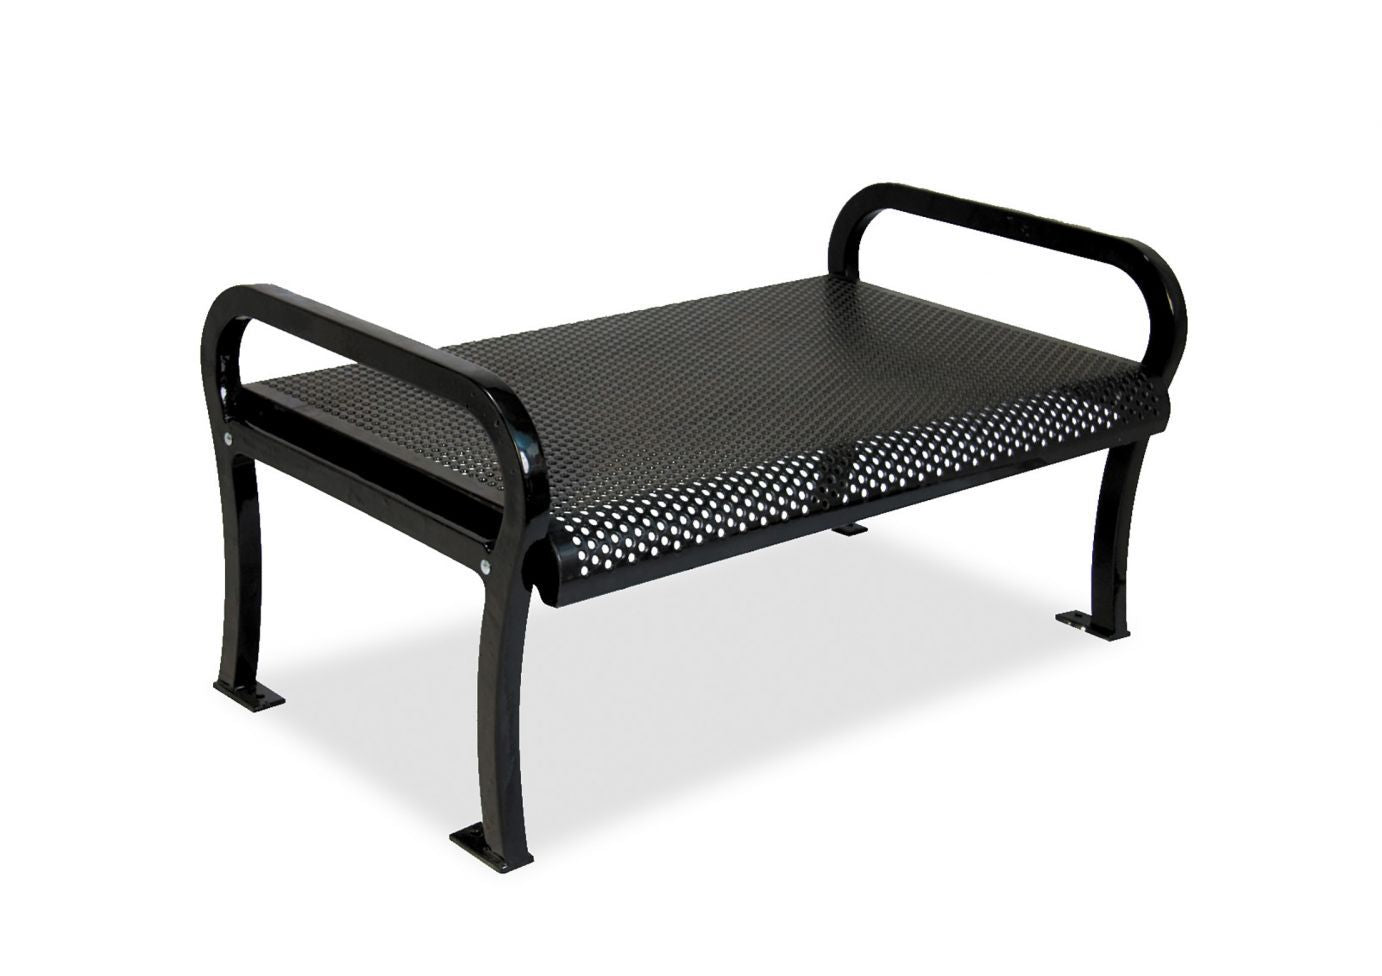 Lexington Perforated Bench without Back | WillyGoat Playground & Park Equipment